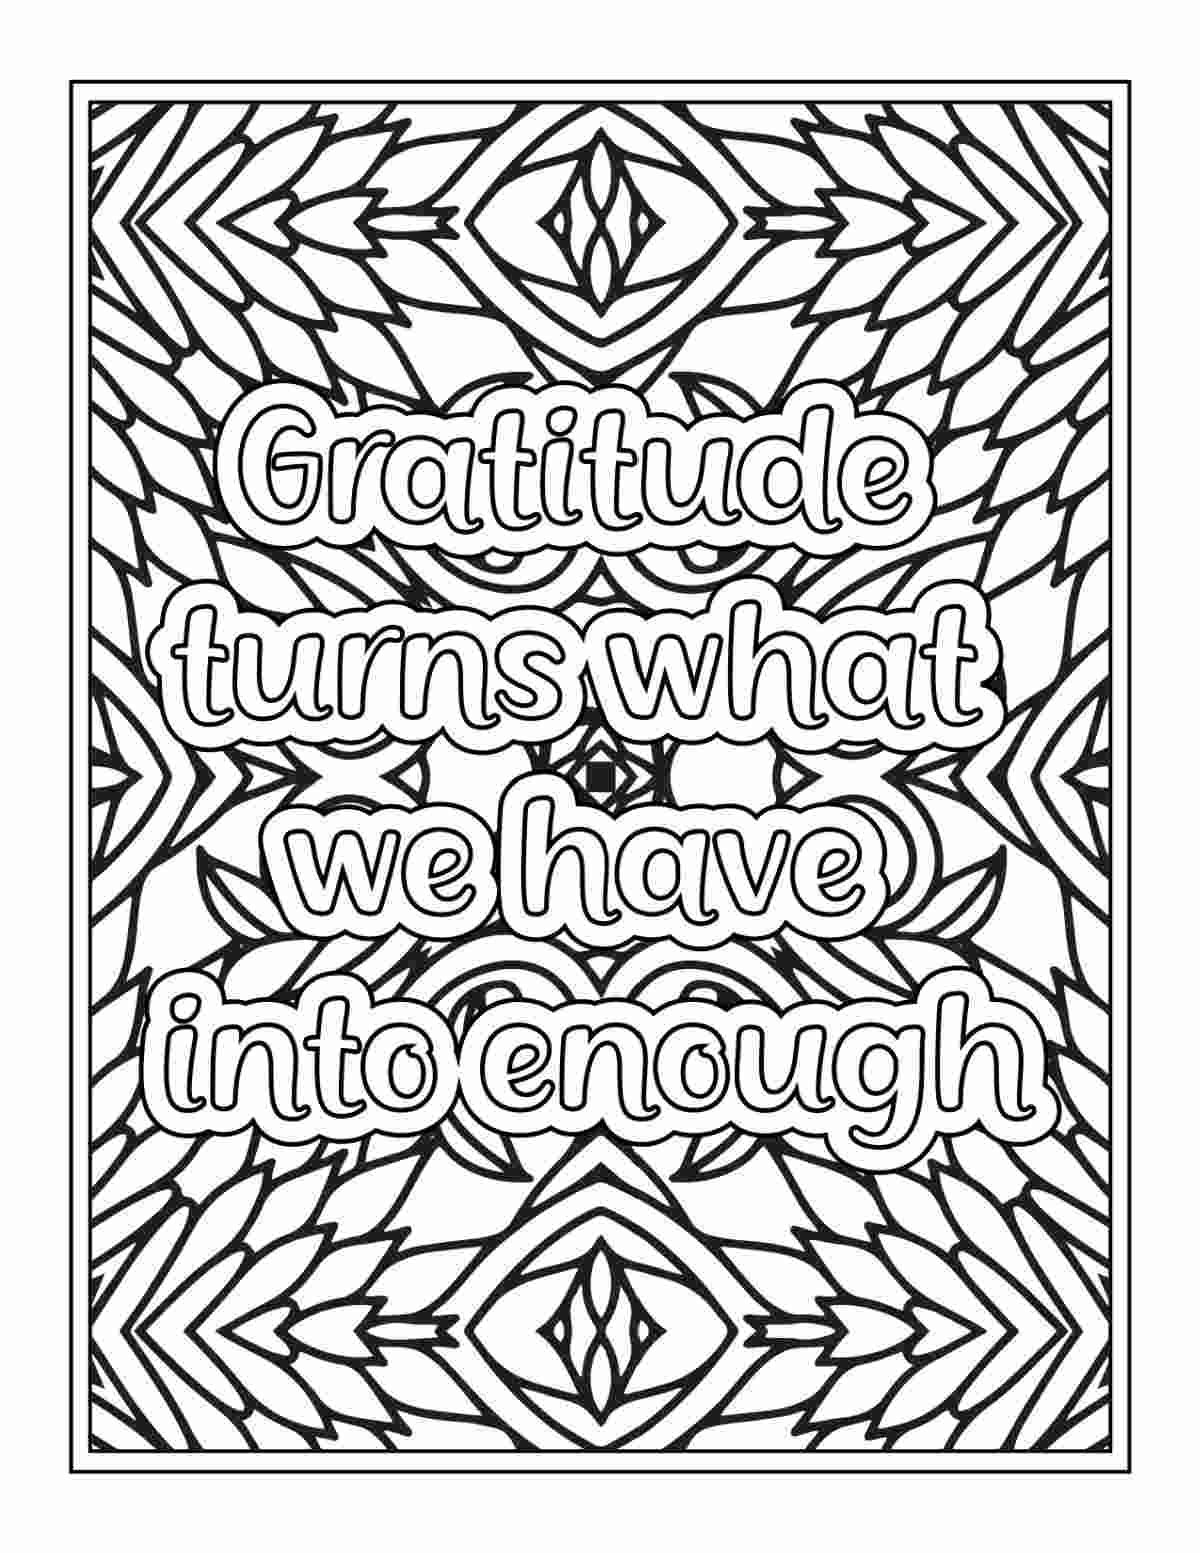 Blank gratitude coloring pages with a geometric design across the entire background and the gratitude quote "gratitude turns what we have into enough' in bock letters across the middle.